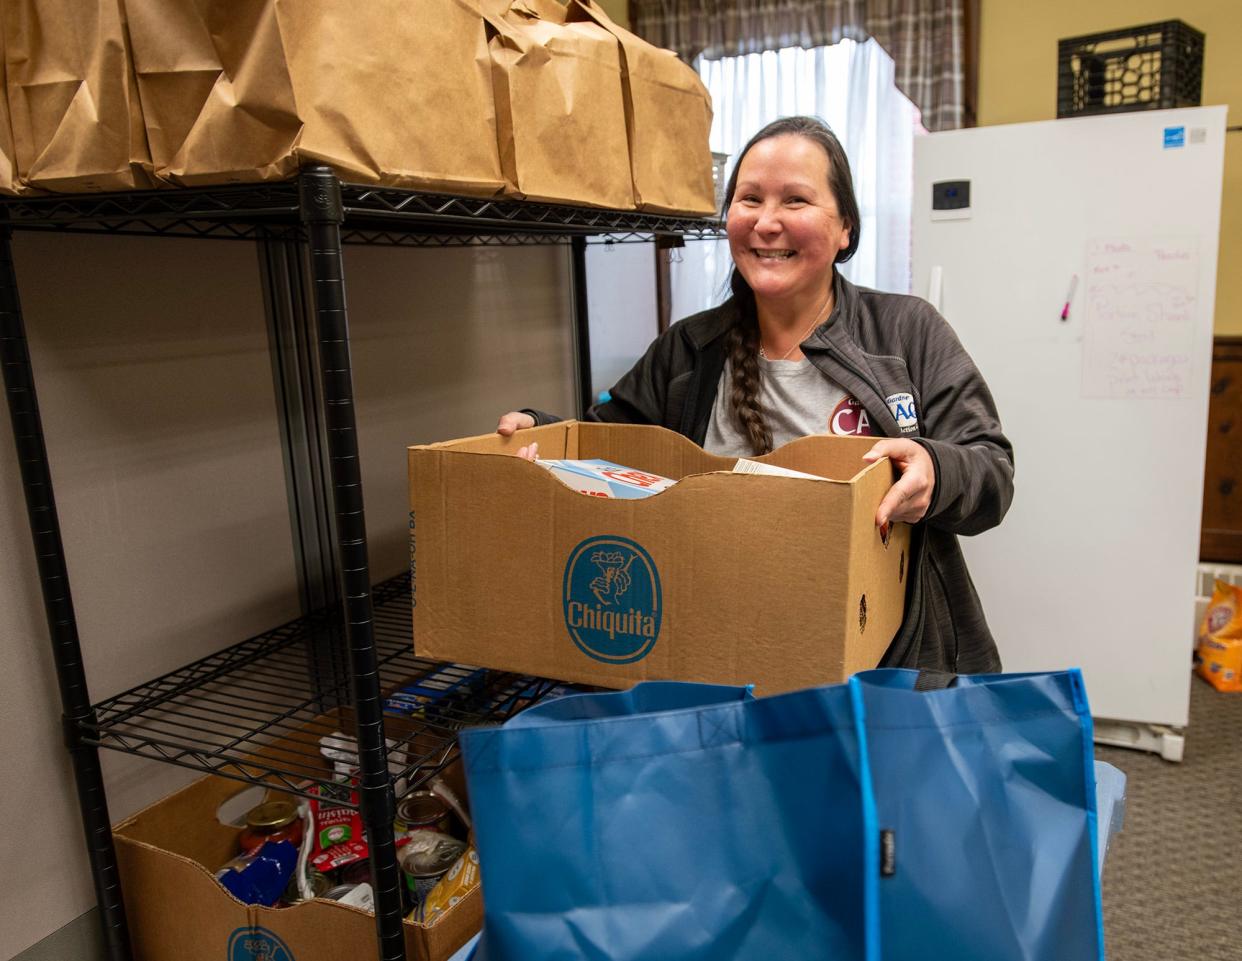 Amy LeBlanc gathers boxes of food for people arriving at the Gardner CAC food pantry Wednesday in Gardner.